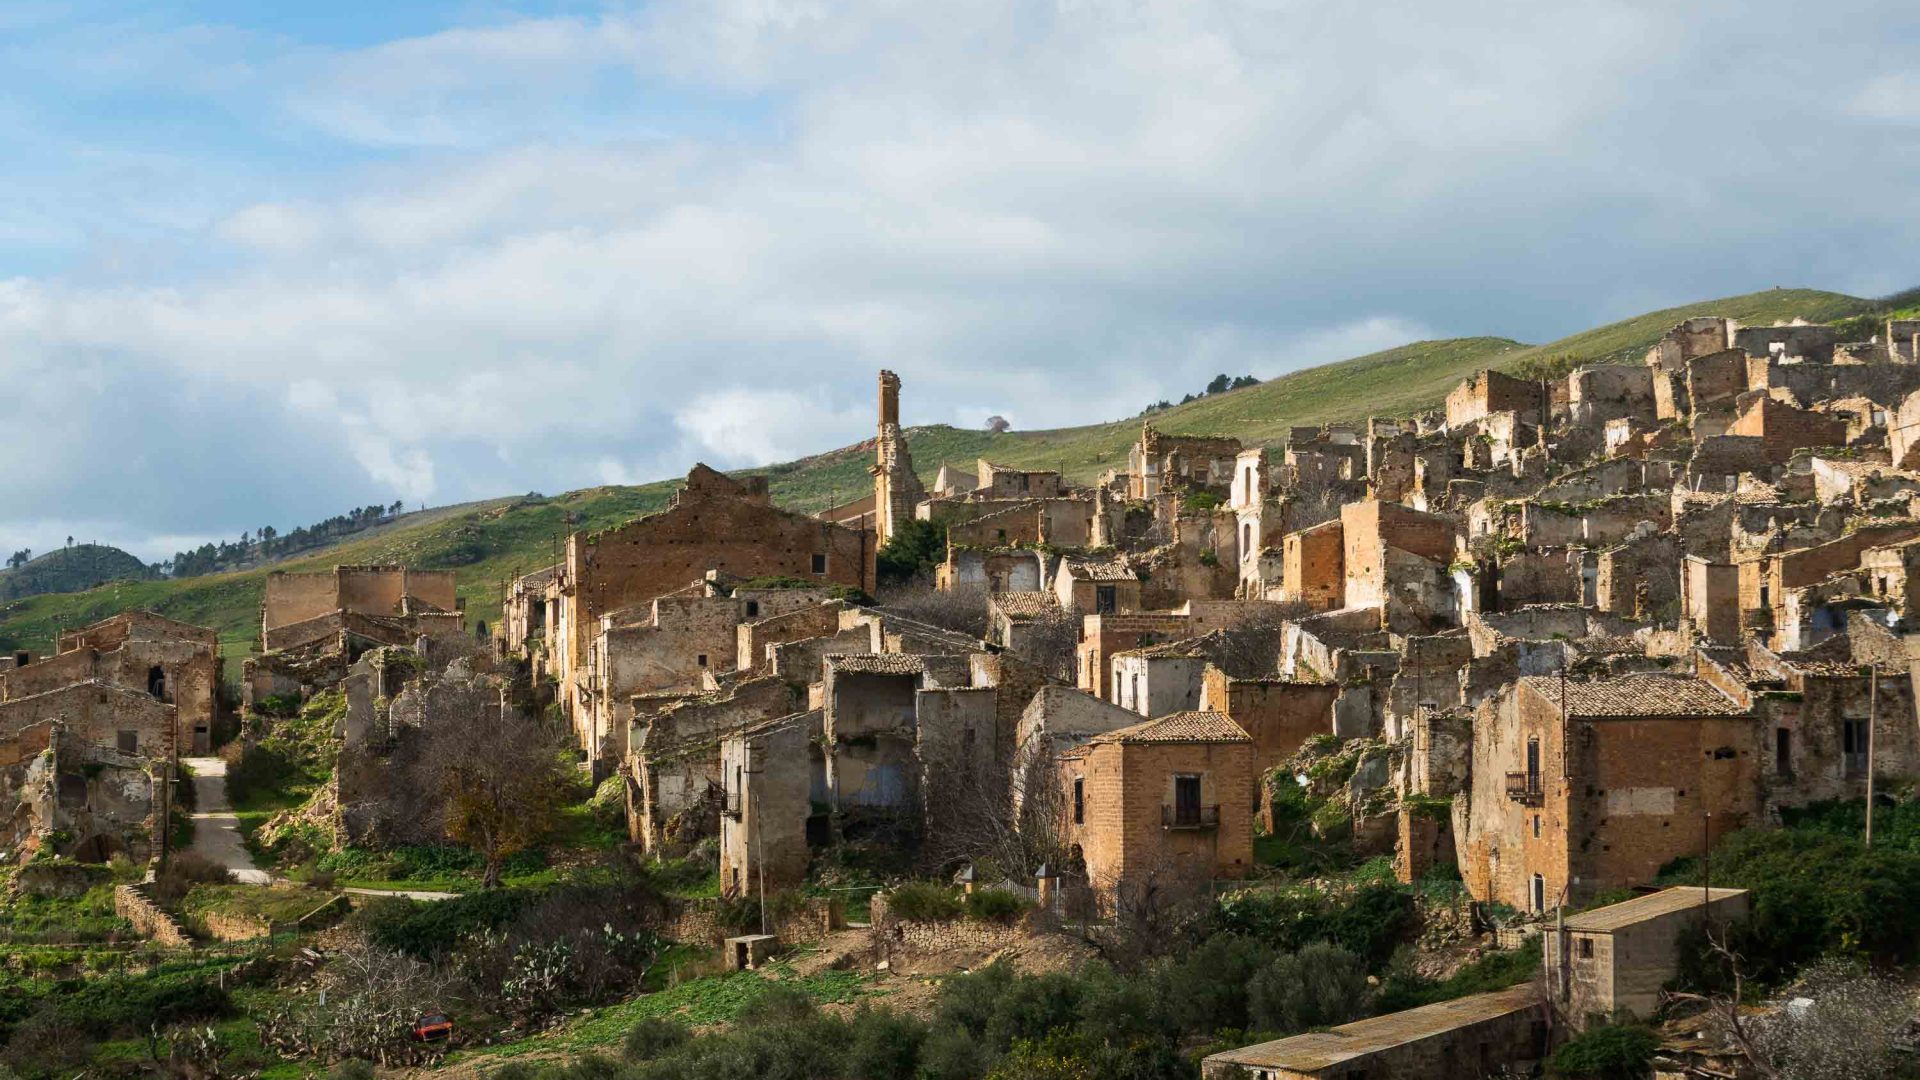 The ghost town of Poggioreale with old stone houses in a valley.